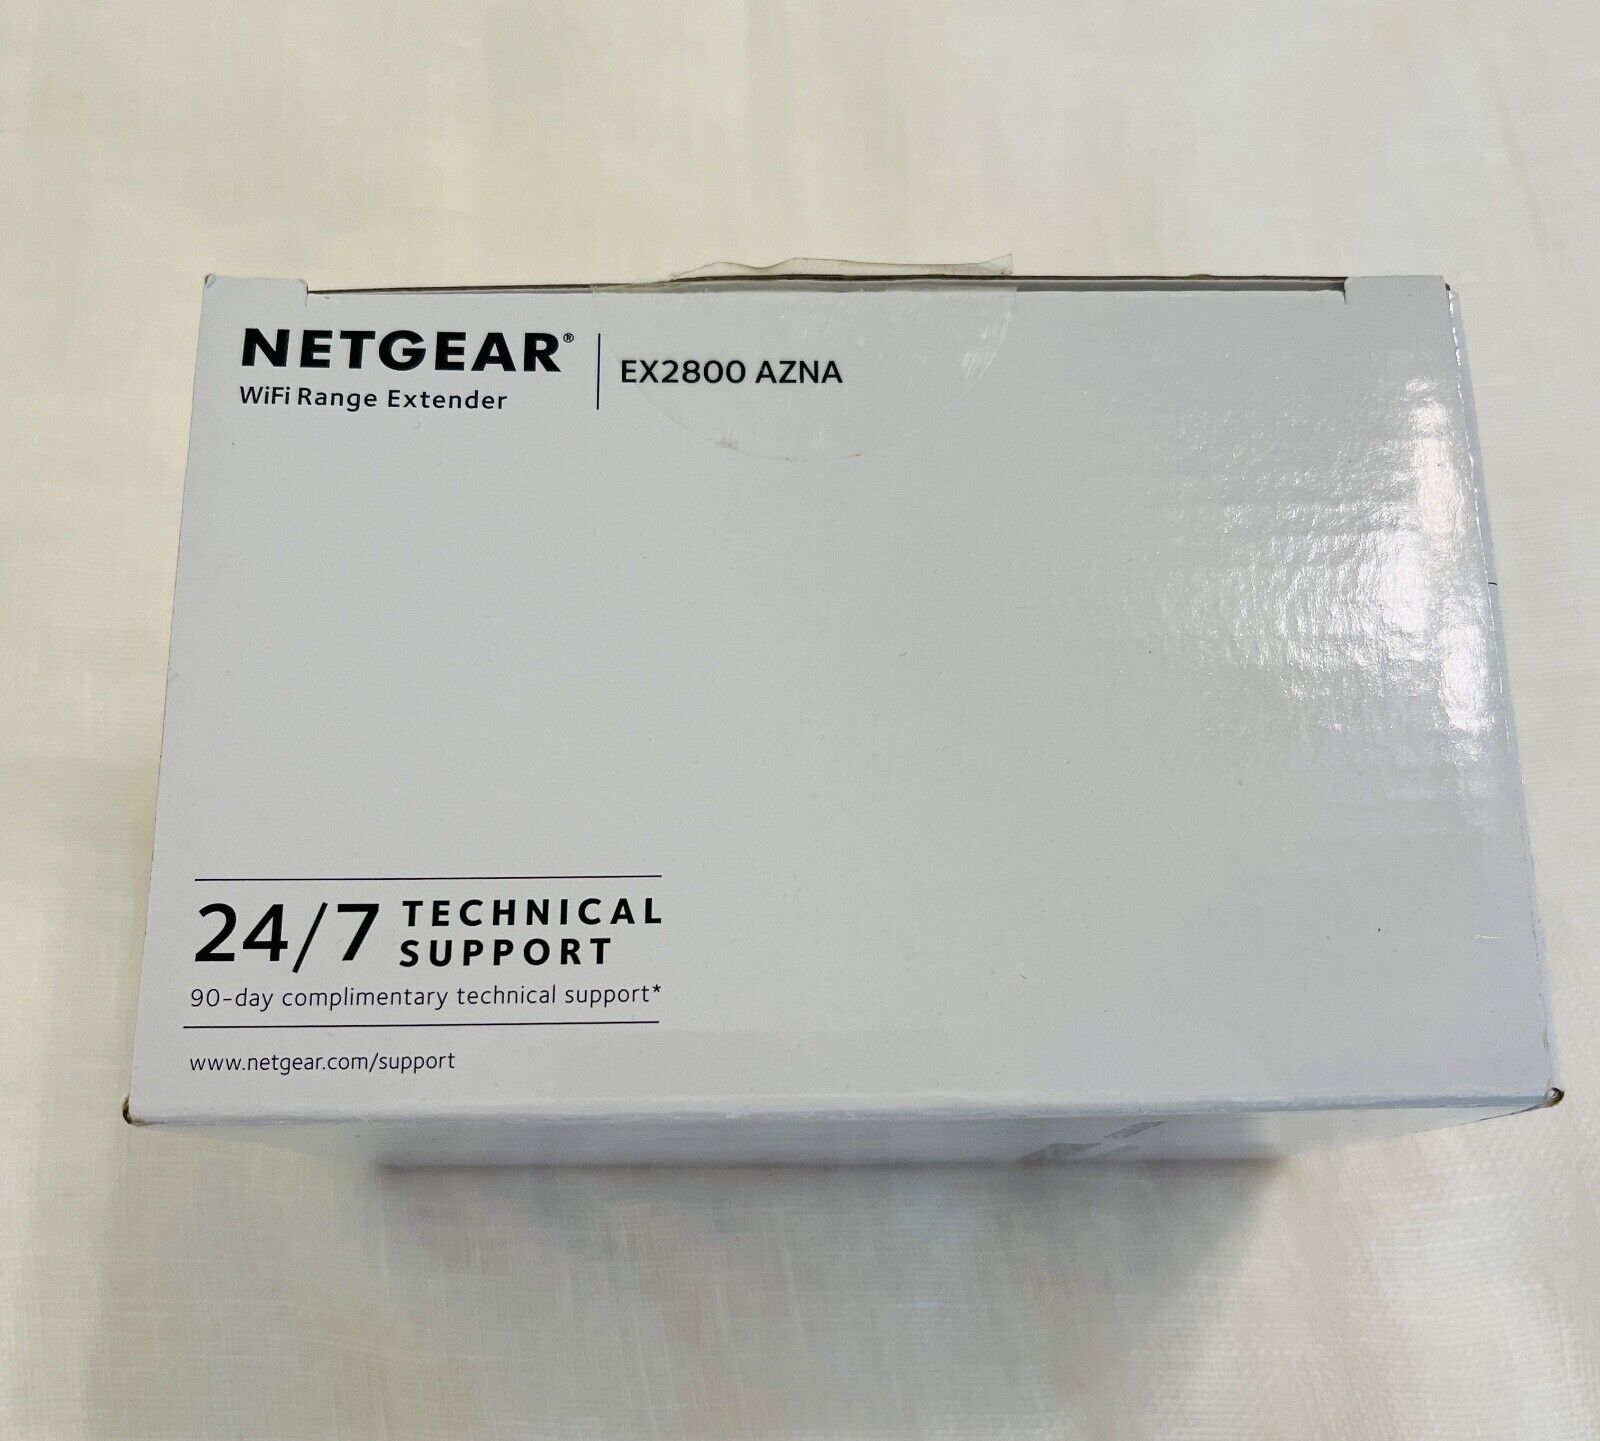 Netgear WiFi Range Extender EX2800 - Internet Covers 1200 sq.ft. and 20 Devices